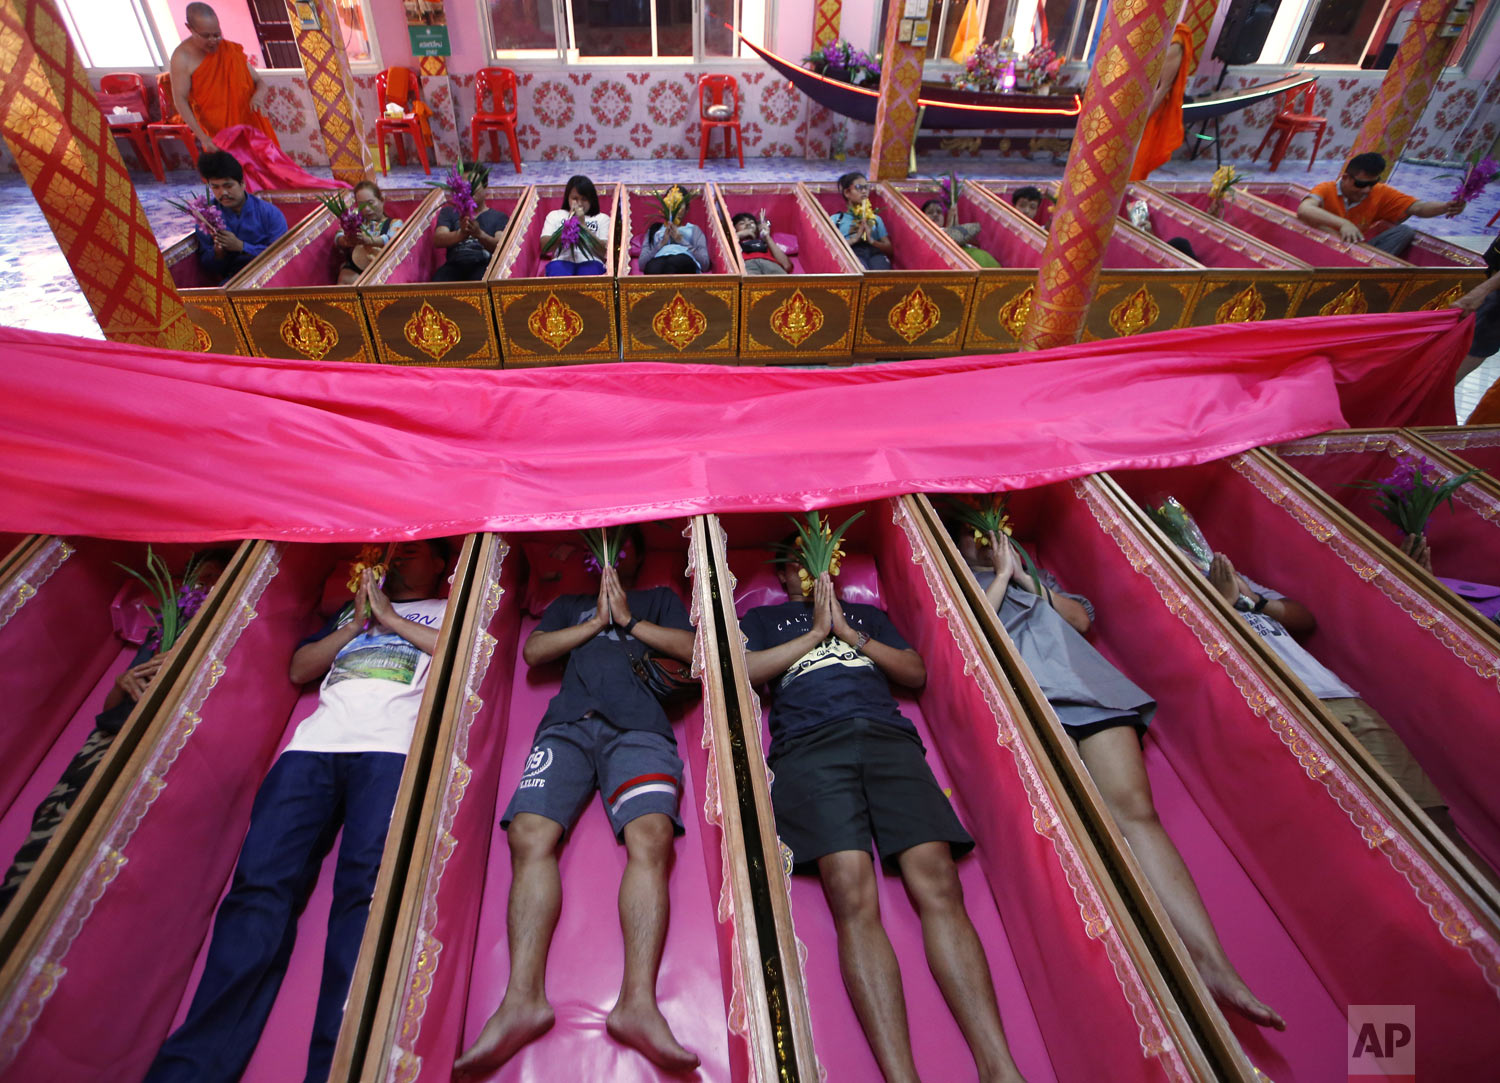  People pray as they take turns lying inside coffins at the Takien temple in suburban Bangkok, Thailand on Monday, Dec. 31, 2018. Worshippers believe that the ceremony – symbolizing death and rebirth – helps them rid themselves of bad luck and gives 